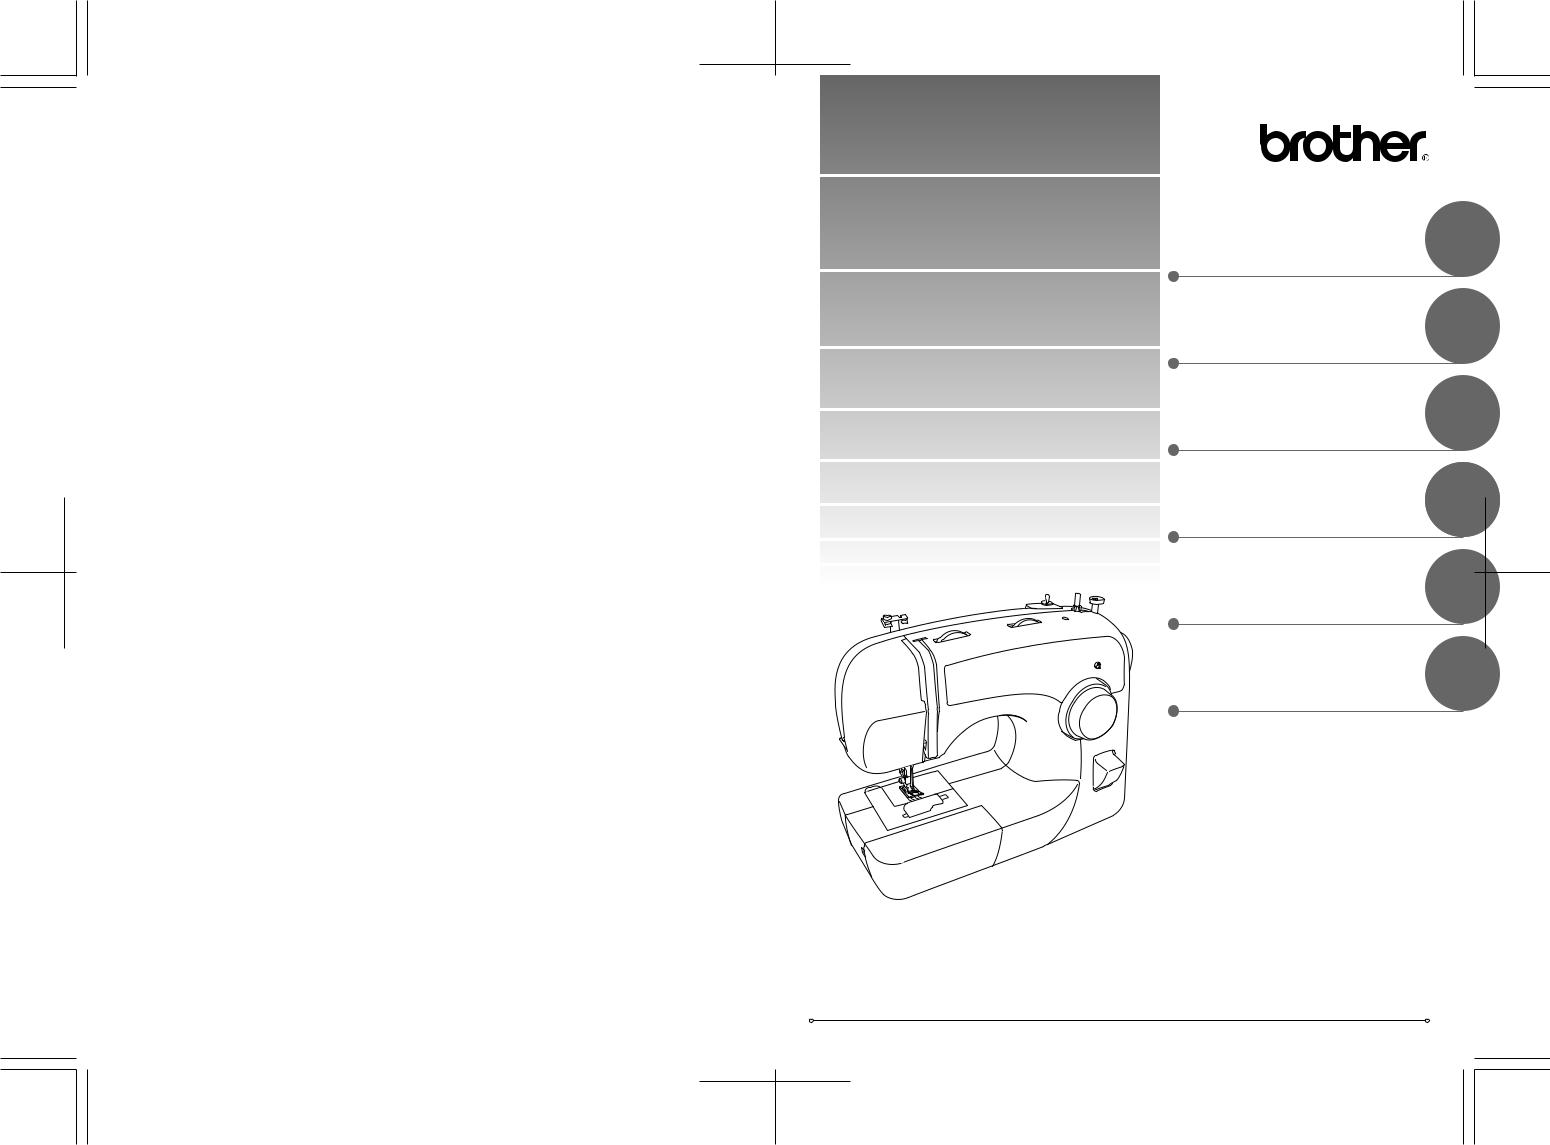 Brother 885-S27, BM-3500 User Manual